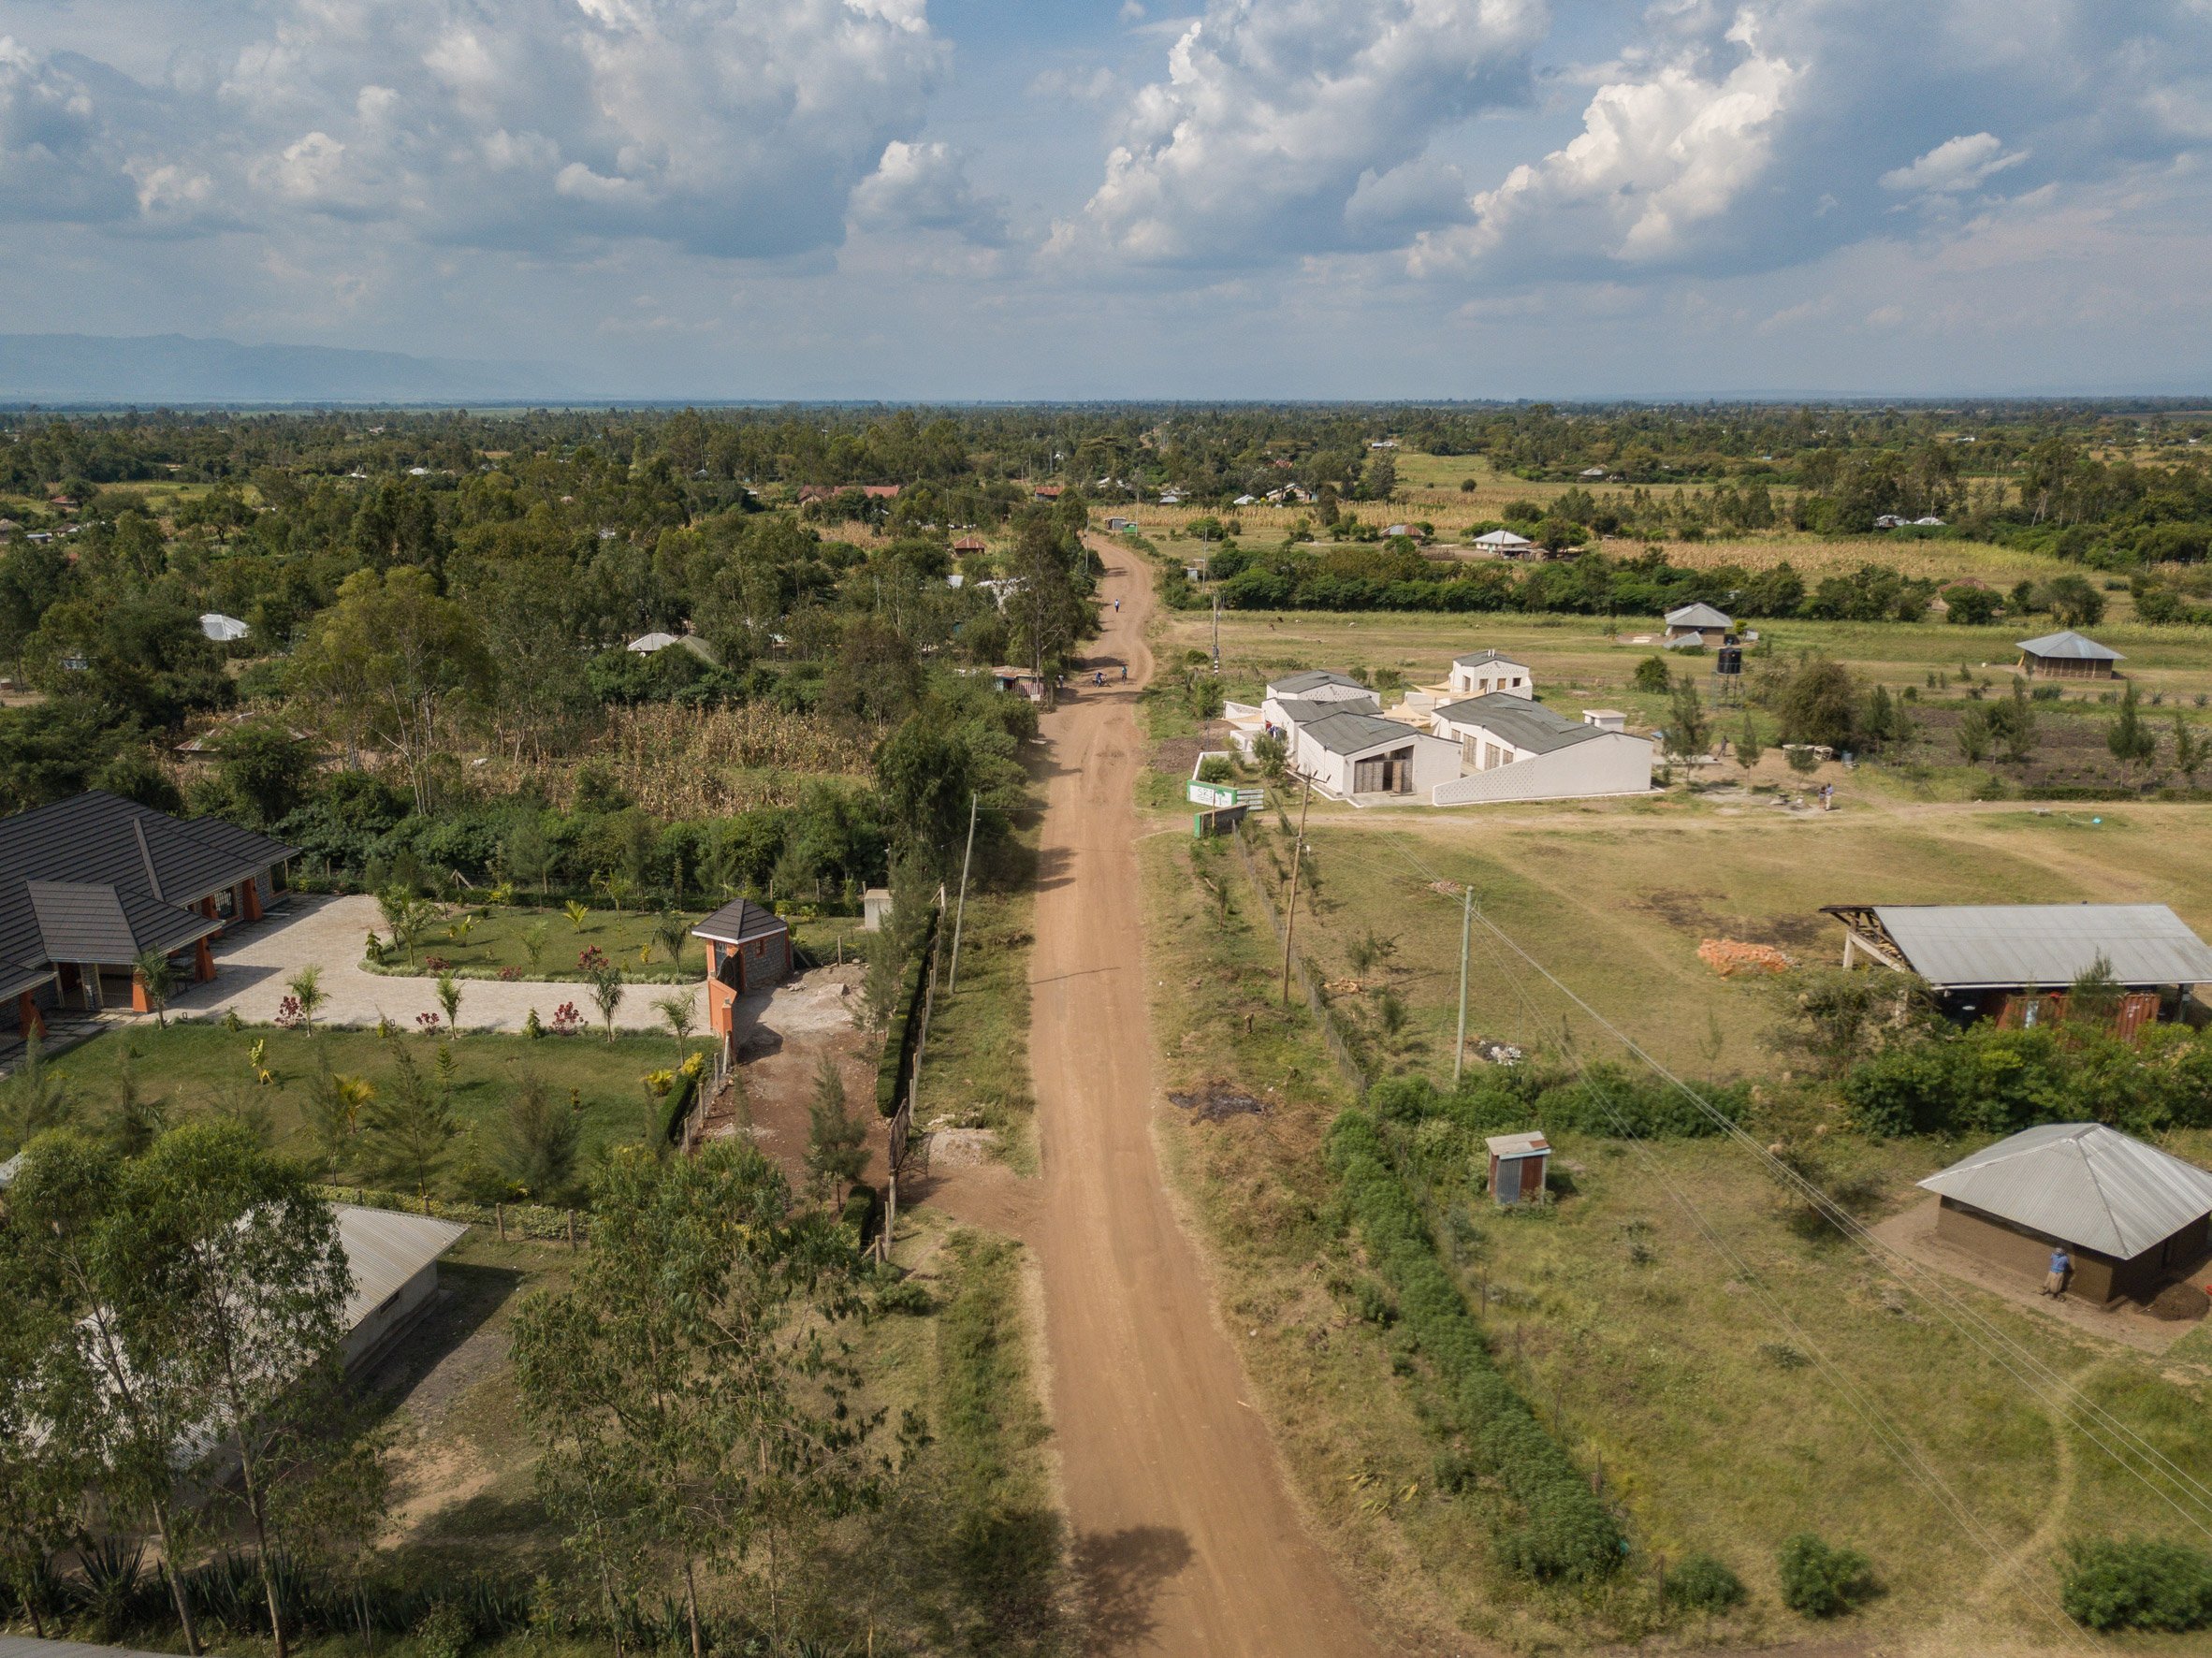 Aerial view of the Okana Centre for Change in Kenya, by Laura Katharina Straehle and Ellen Rouwendal